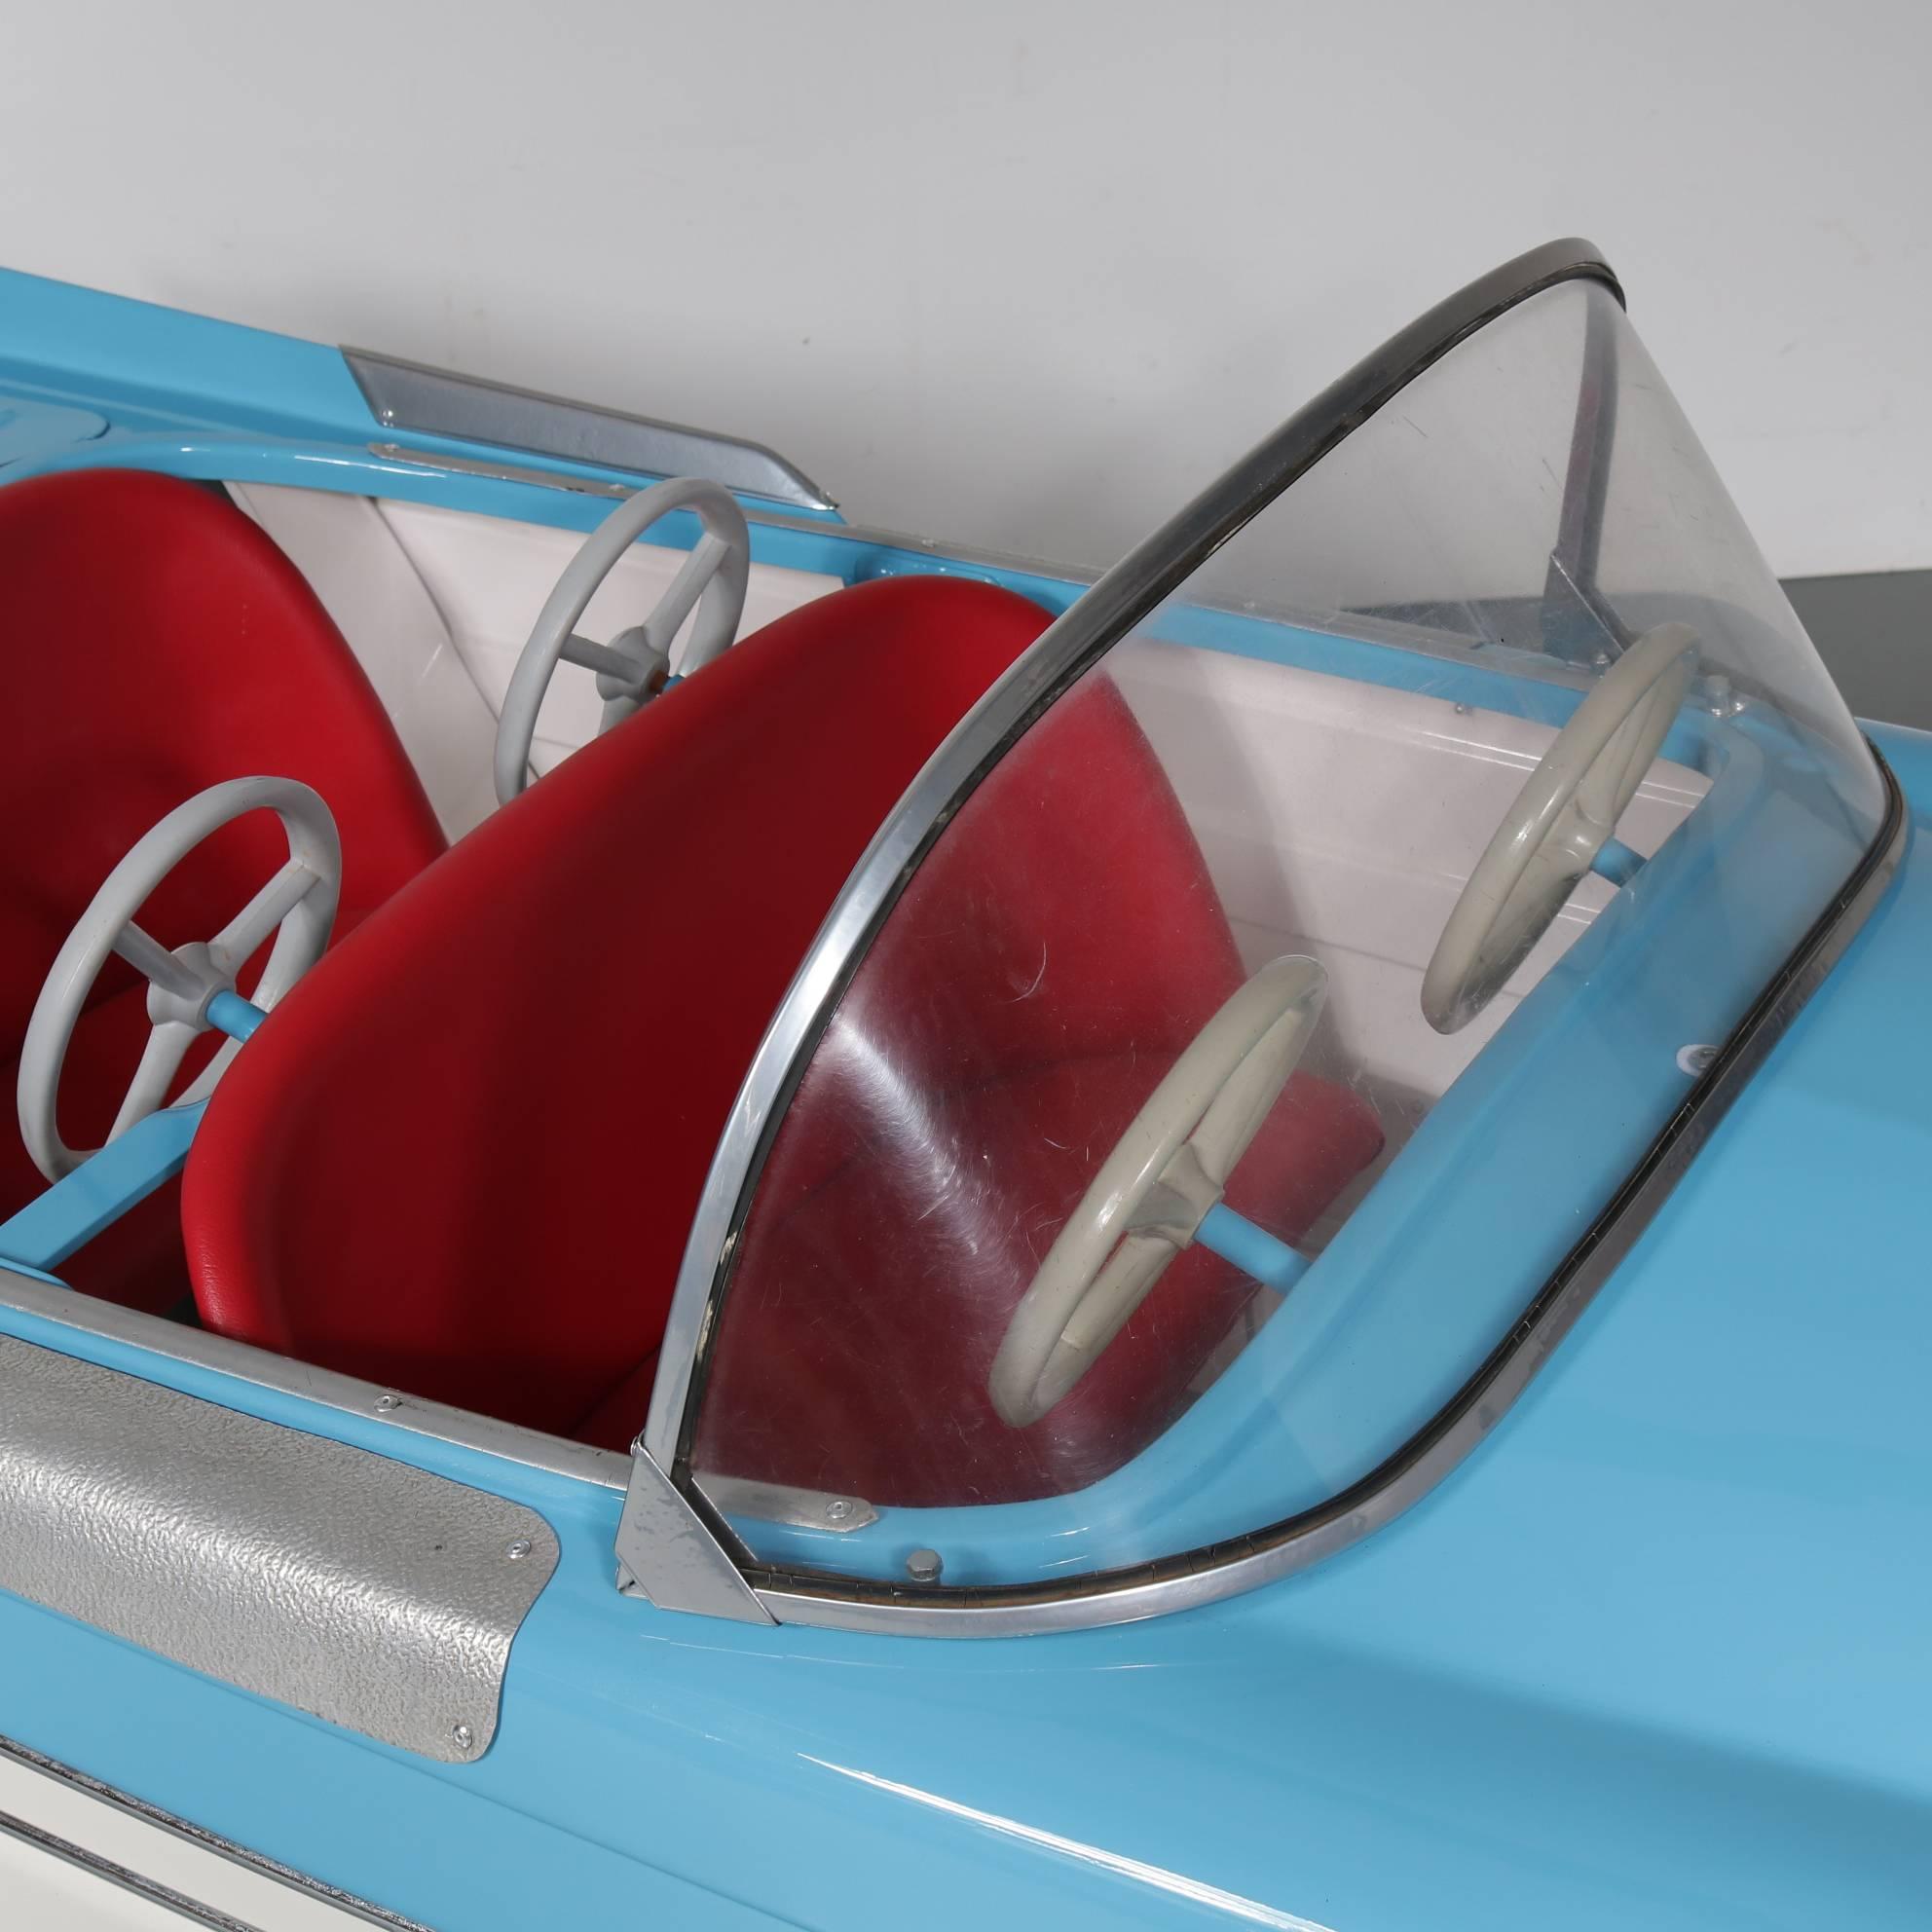 A unique, very rare Dodge carousel car designed by Karel Baeyens, produced by l'Autopede in Ghent, Belgium, circa 1960.

This eye-catching piece has been beautifully renewed after it's original standards. It is made of metal, painted in a